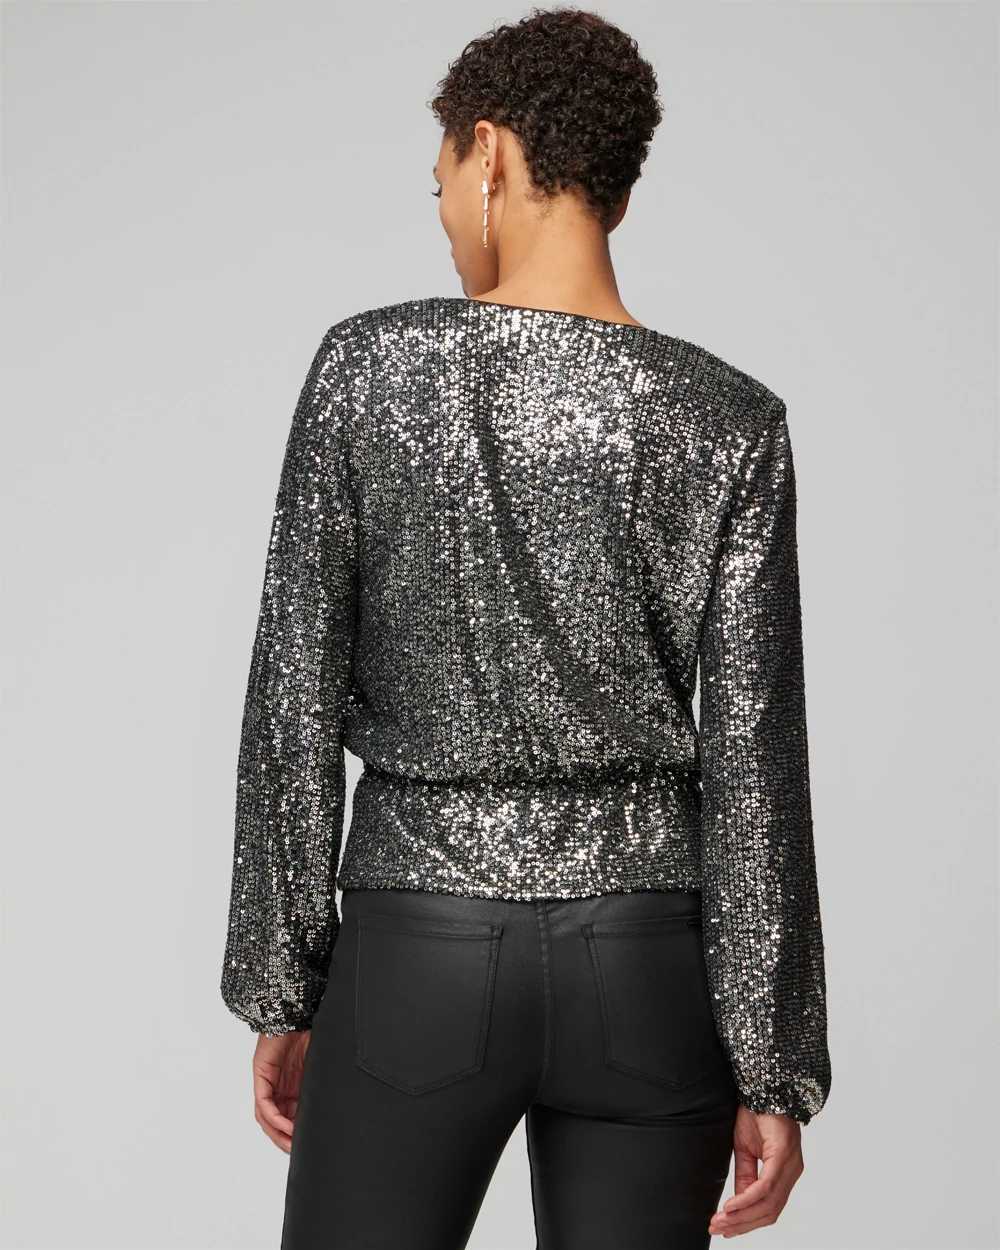 Long Sleeve Sequin Surplice Top click to view larger image.